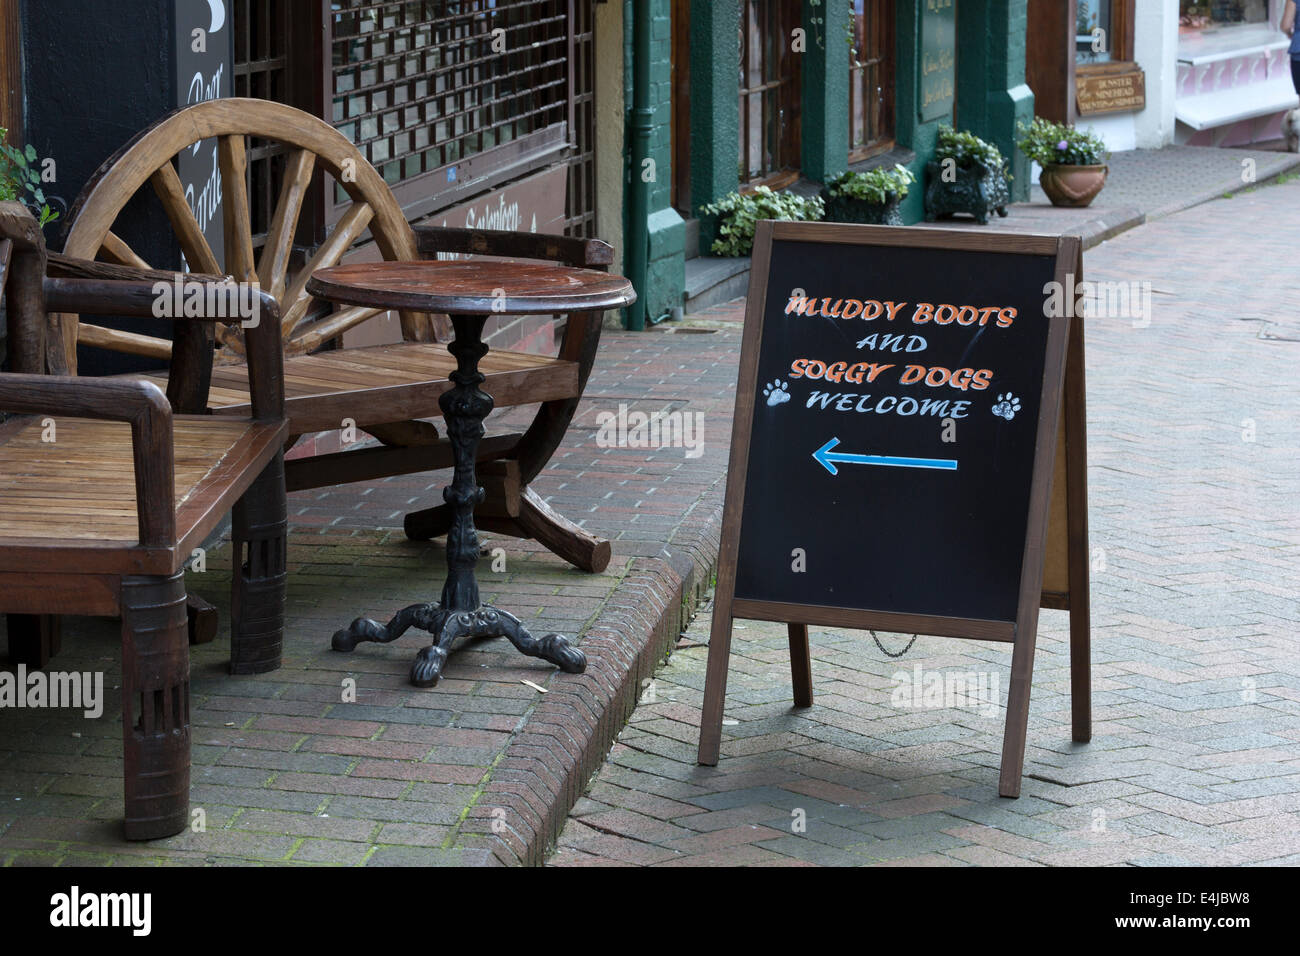 Lynmouth, Devon. A sign outside a pub welcomes muddy boots and soggy dogs. Stock Photo